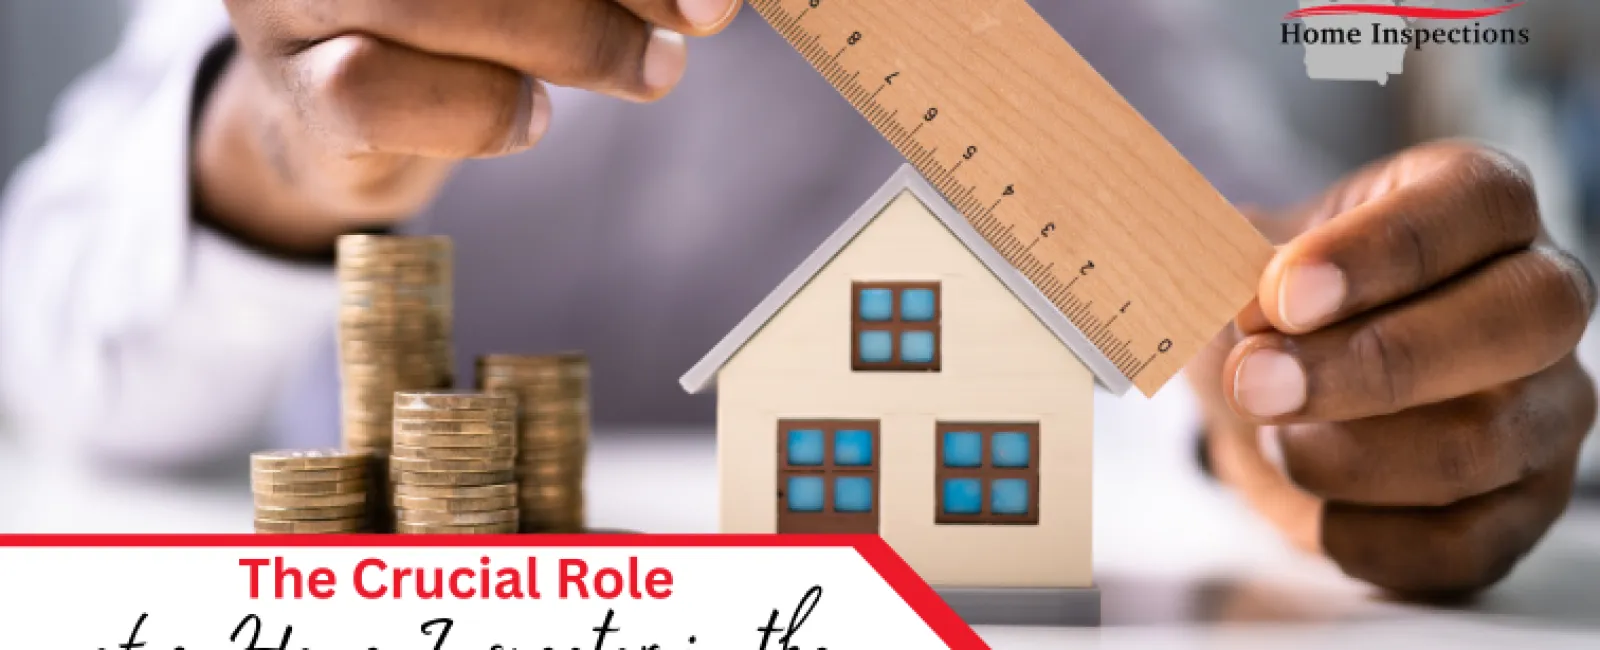 The Crucial Role of a Home Inspector in the Homebuying Process